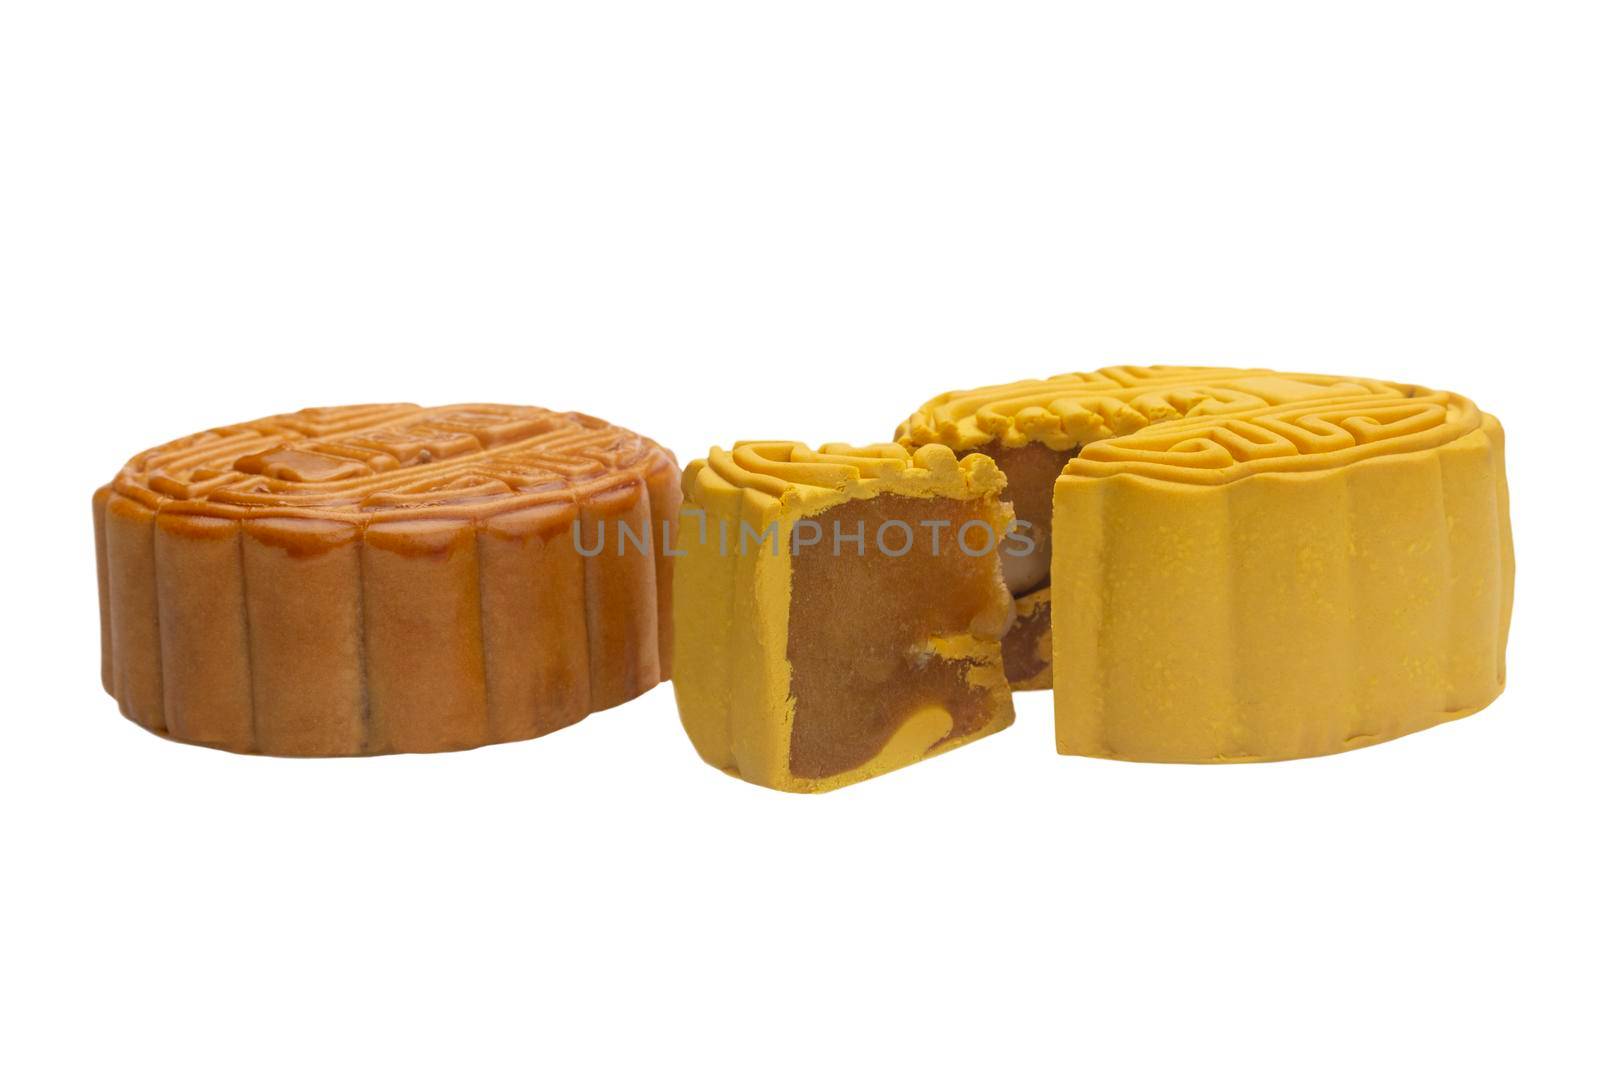 Traditional mooncake with durian and nuts filling on white background, Clipping path included